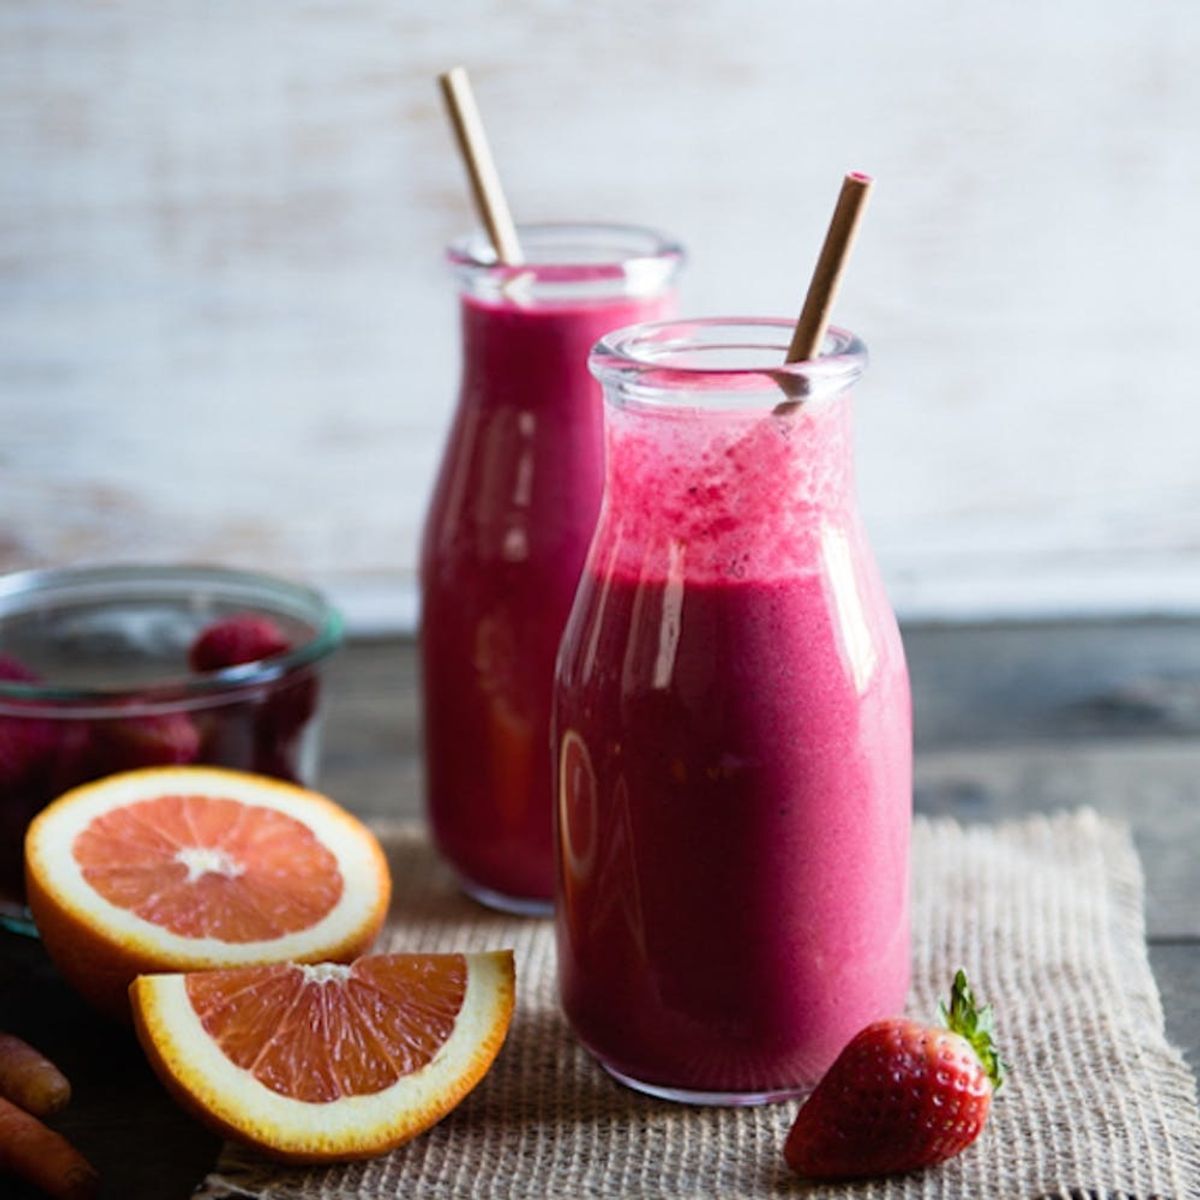 15 Delicious Smoothies Beyoncé Would Approve of